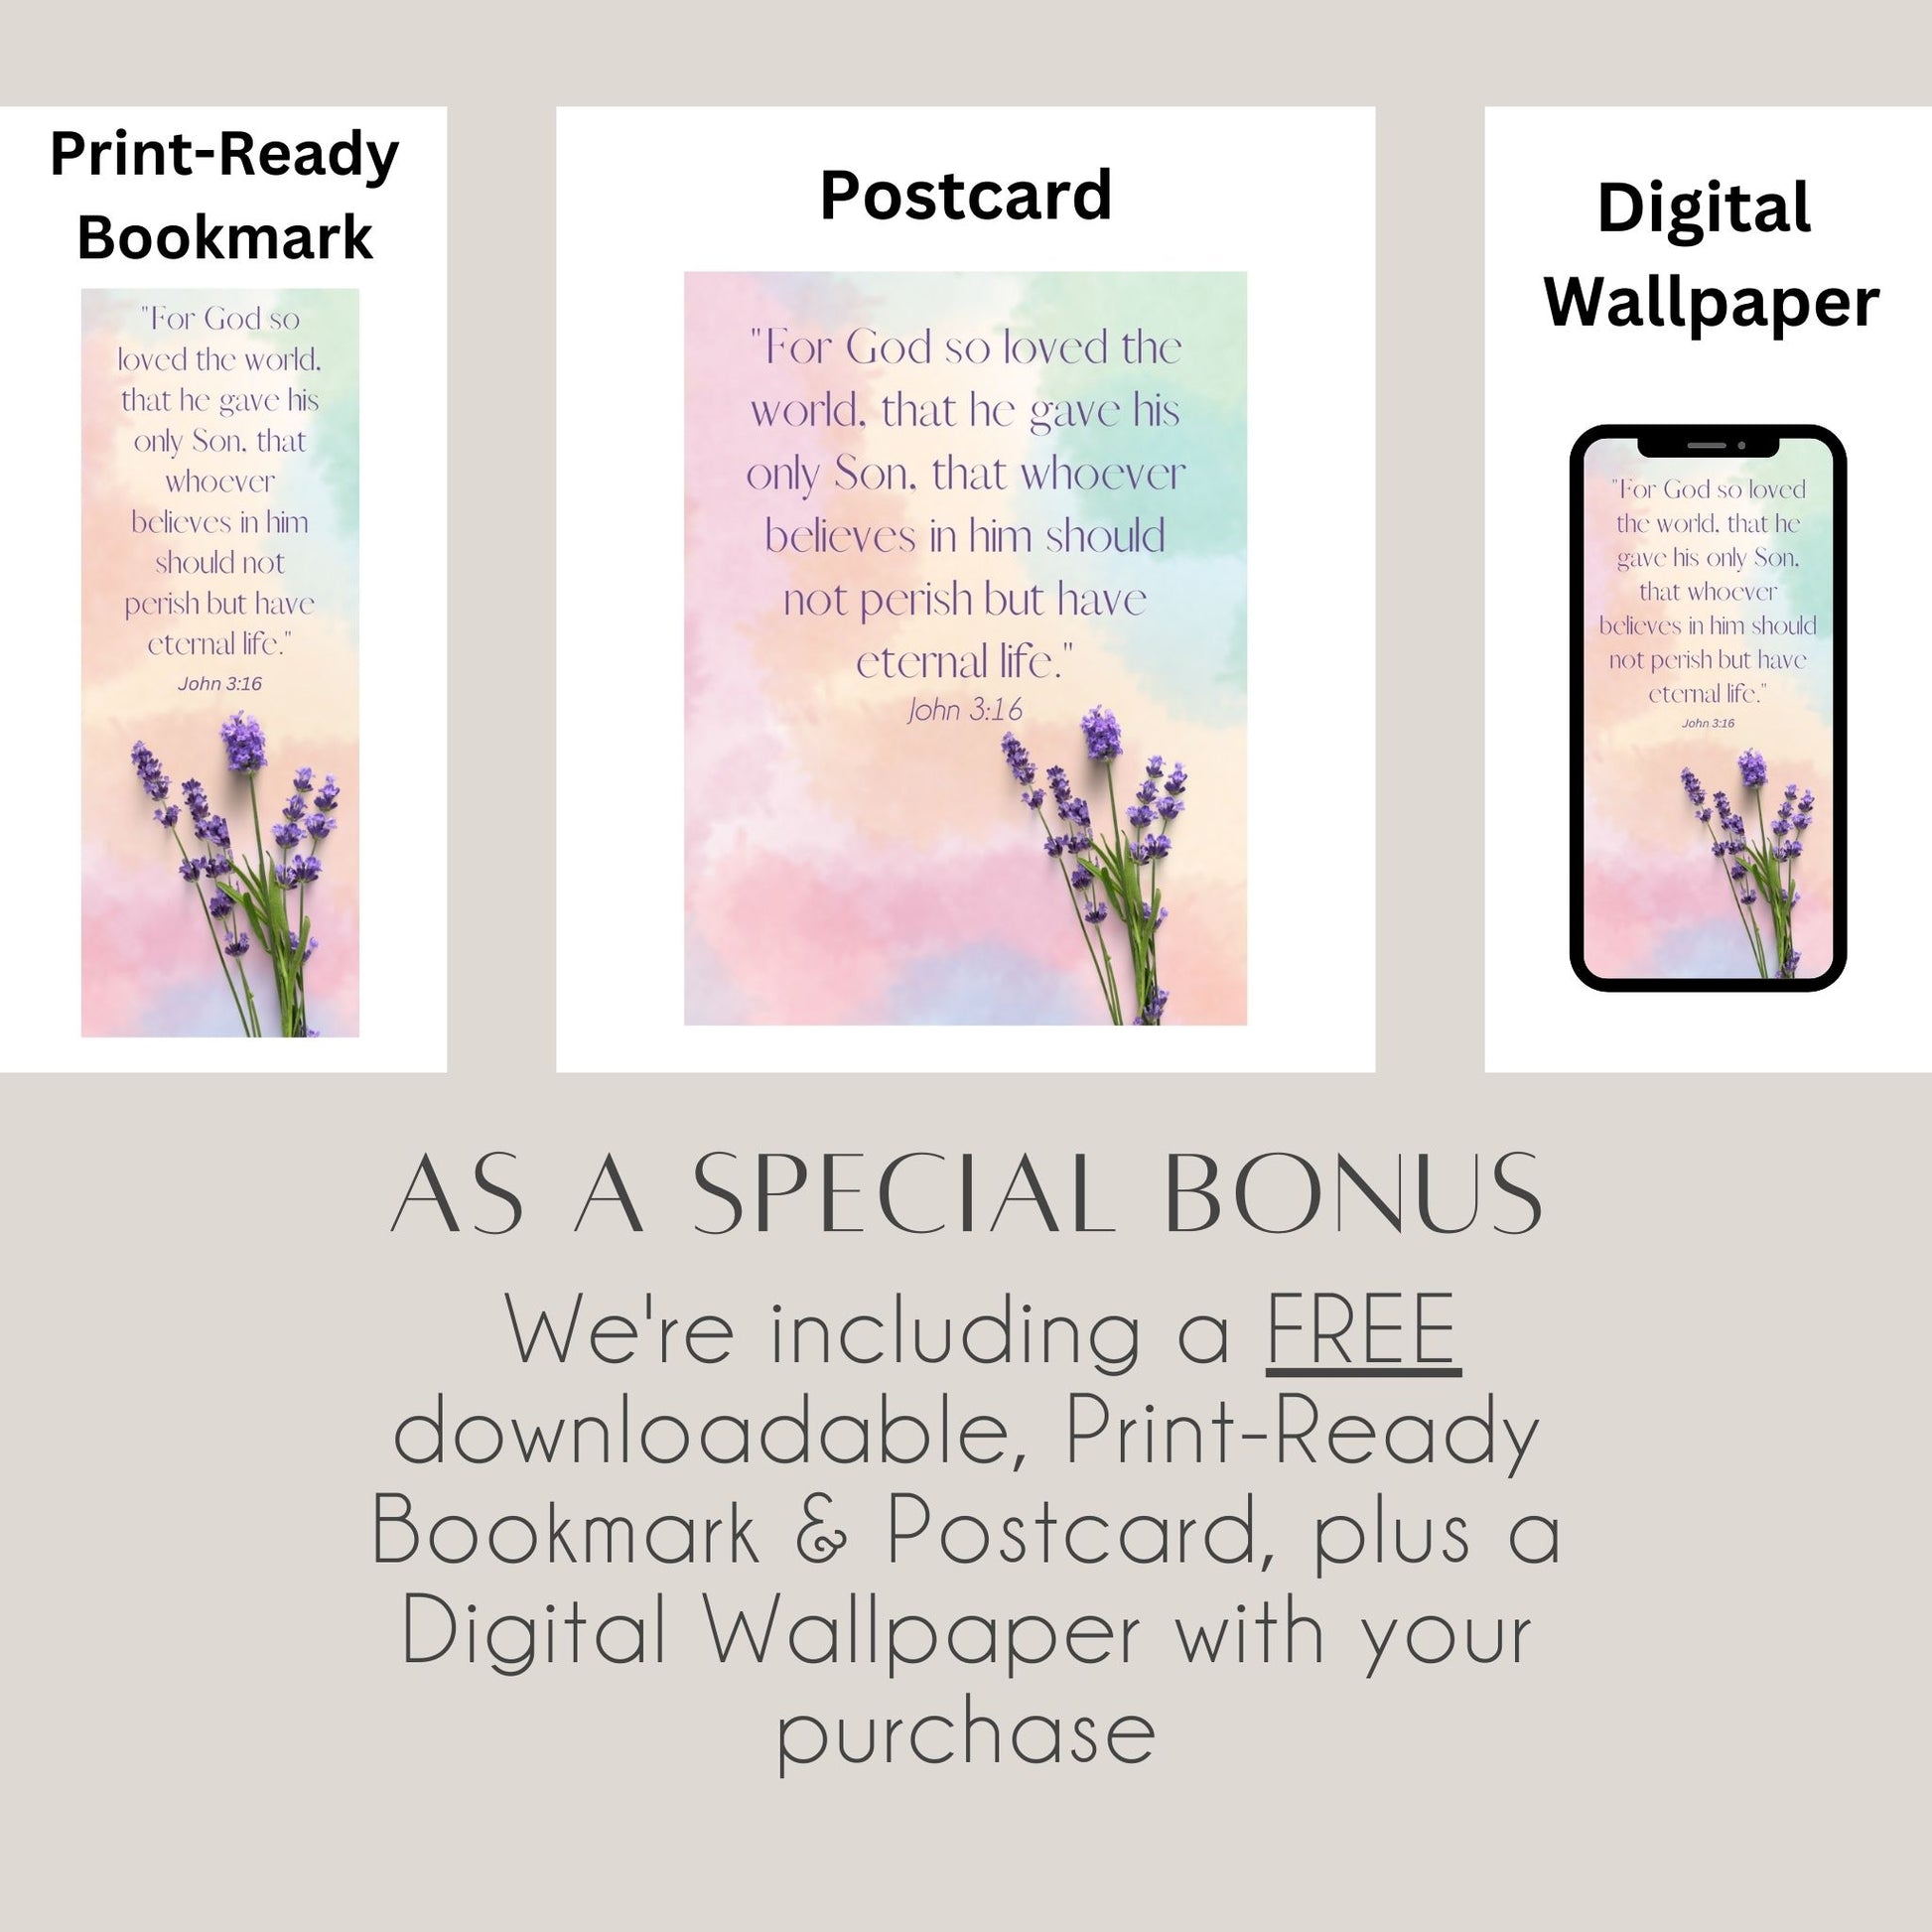 Enjoy a FREE Bonus with every purchase! Receive a set of print-ready, downloadable bookmark & postcard, and digital wallpaper in png format.